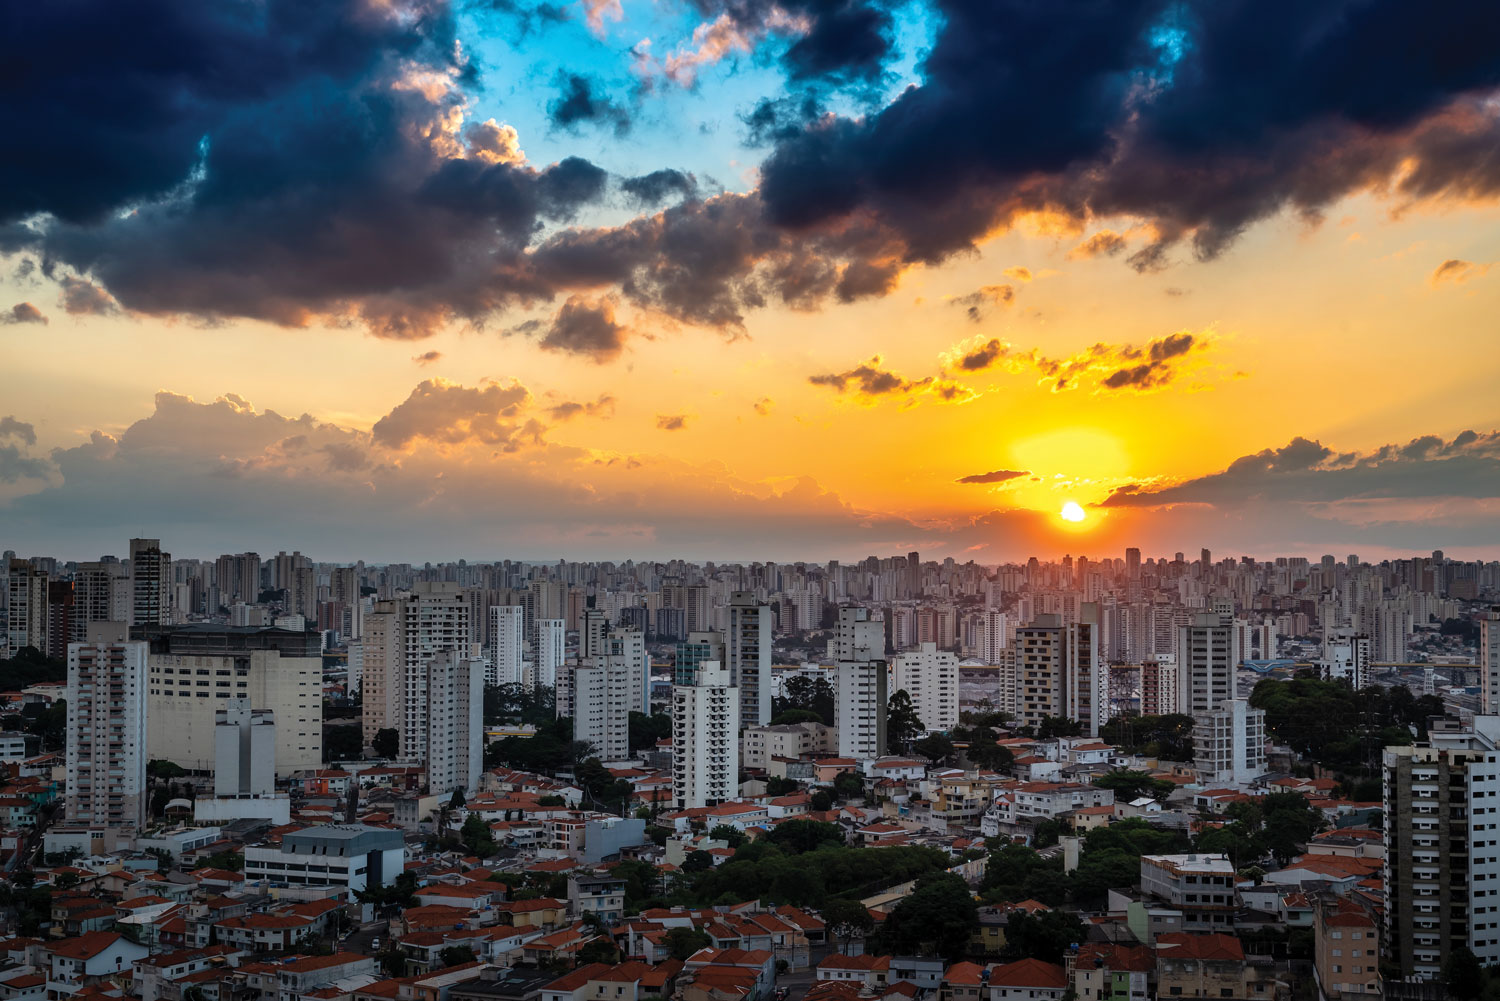 Sao Paulo, Residential Area of the Bras and Mooca Stock Image